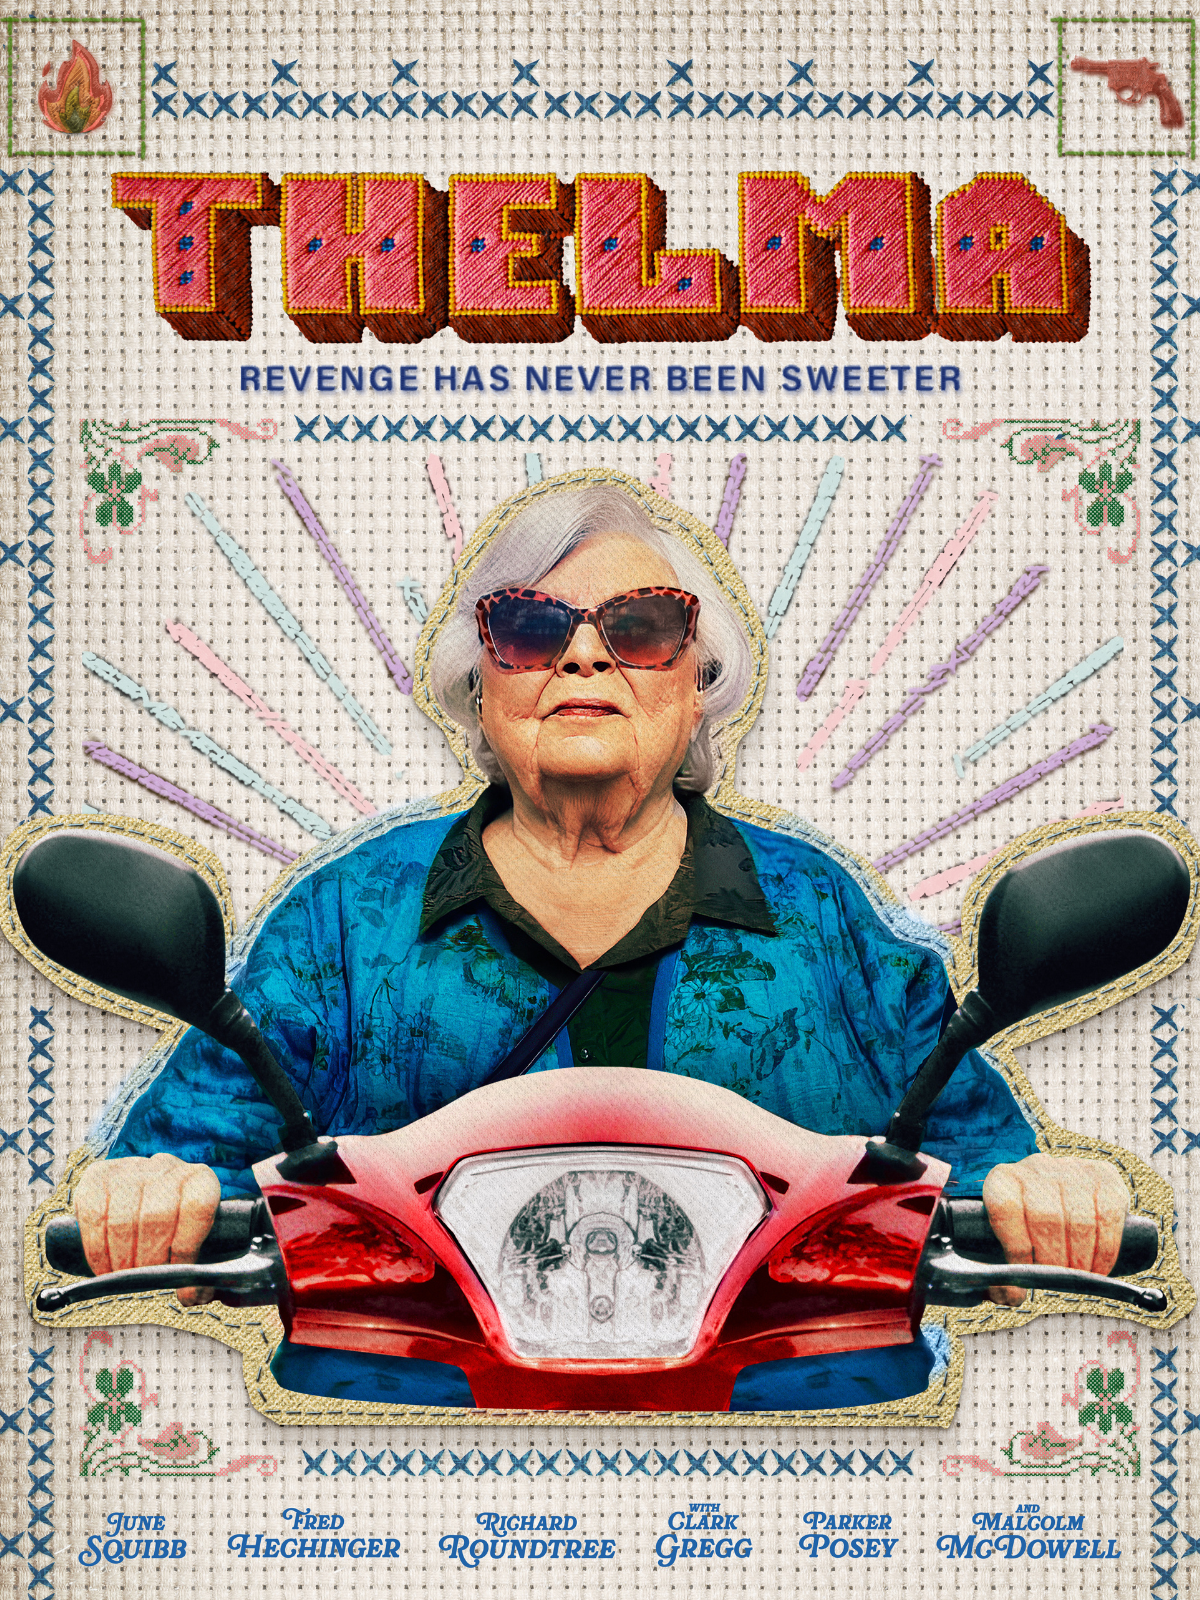 June Squibb in the poster for "Thomas,"